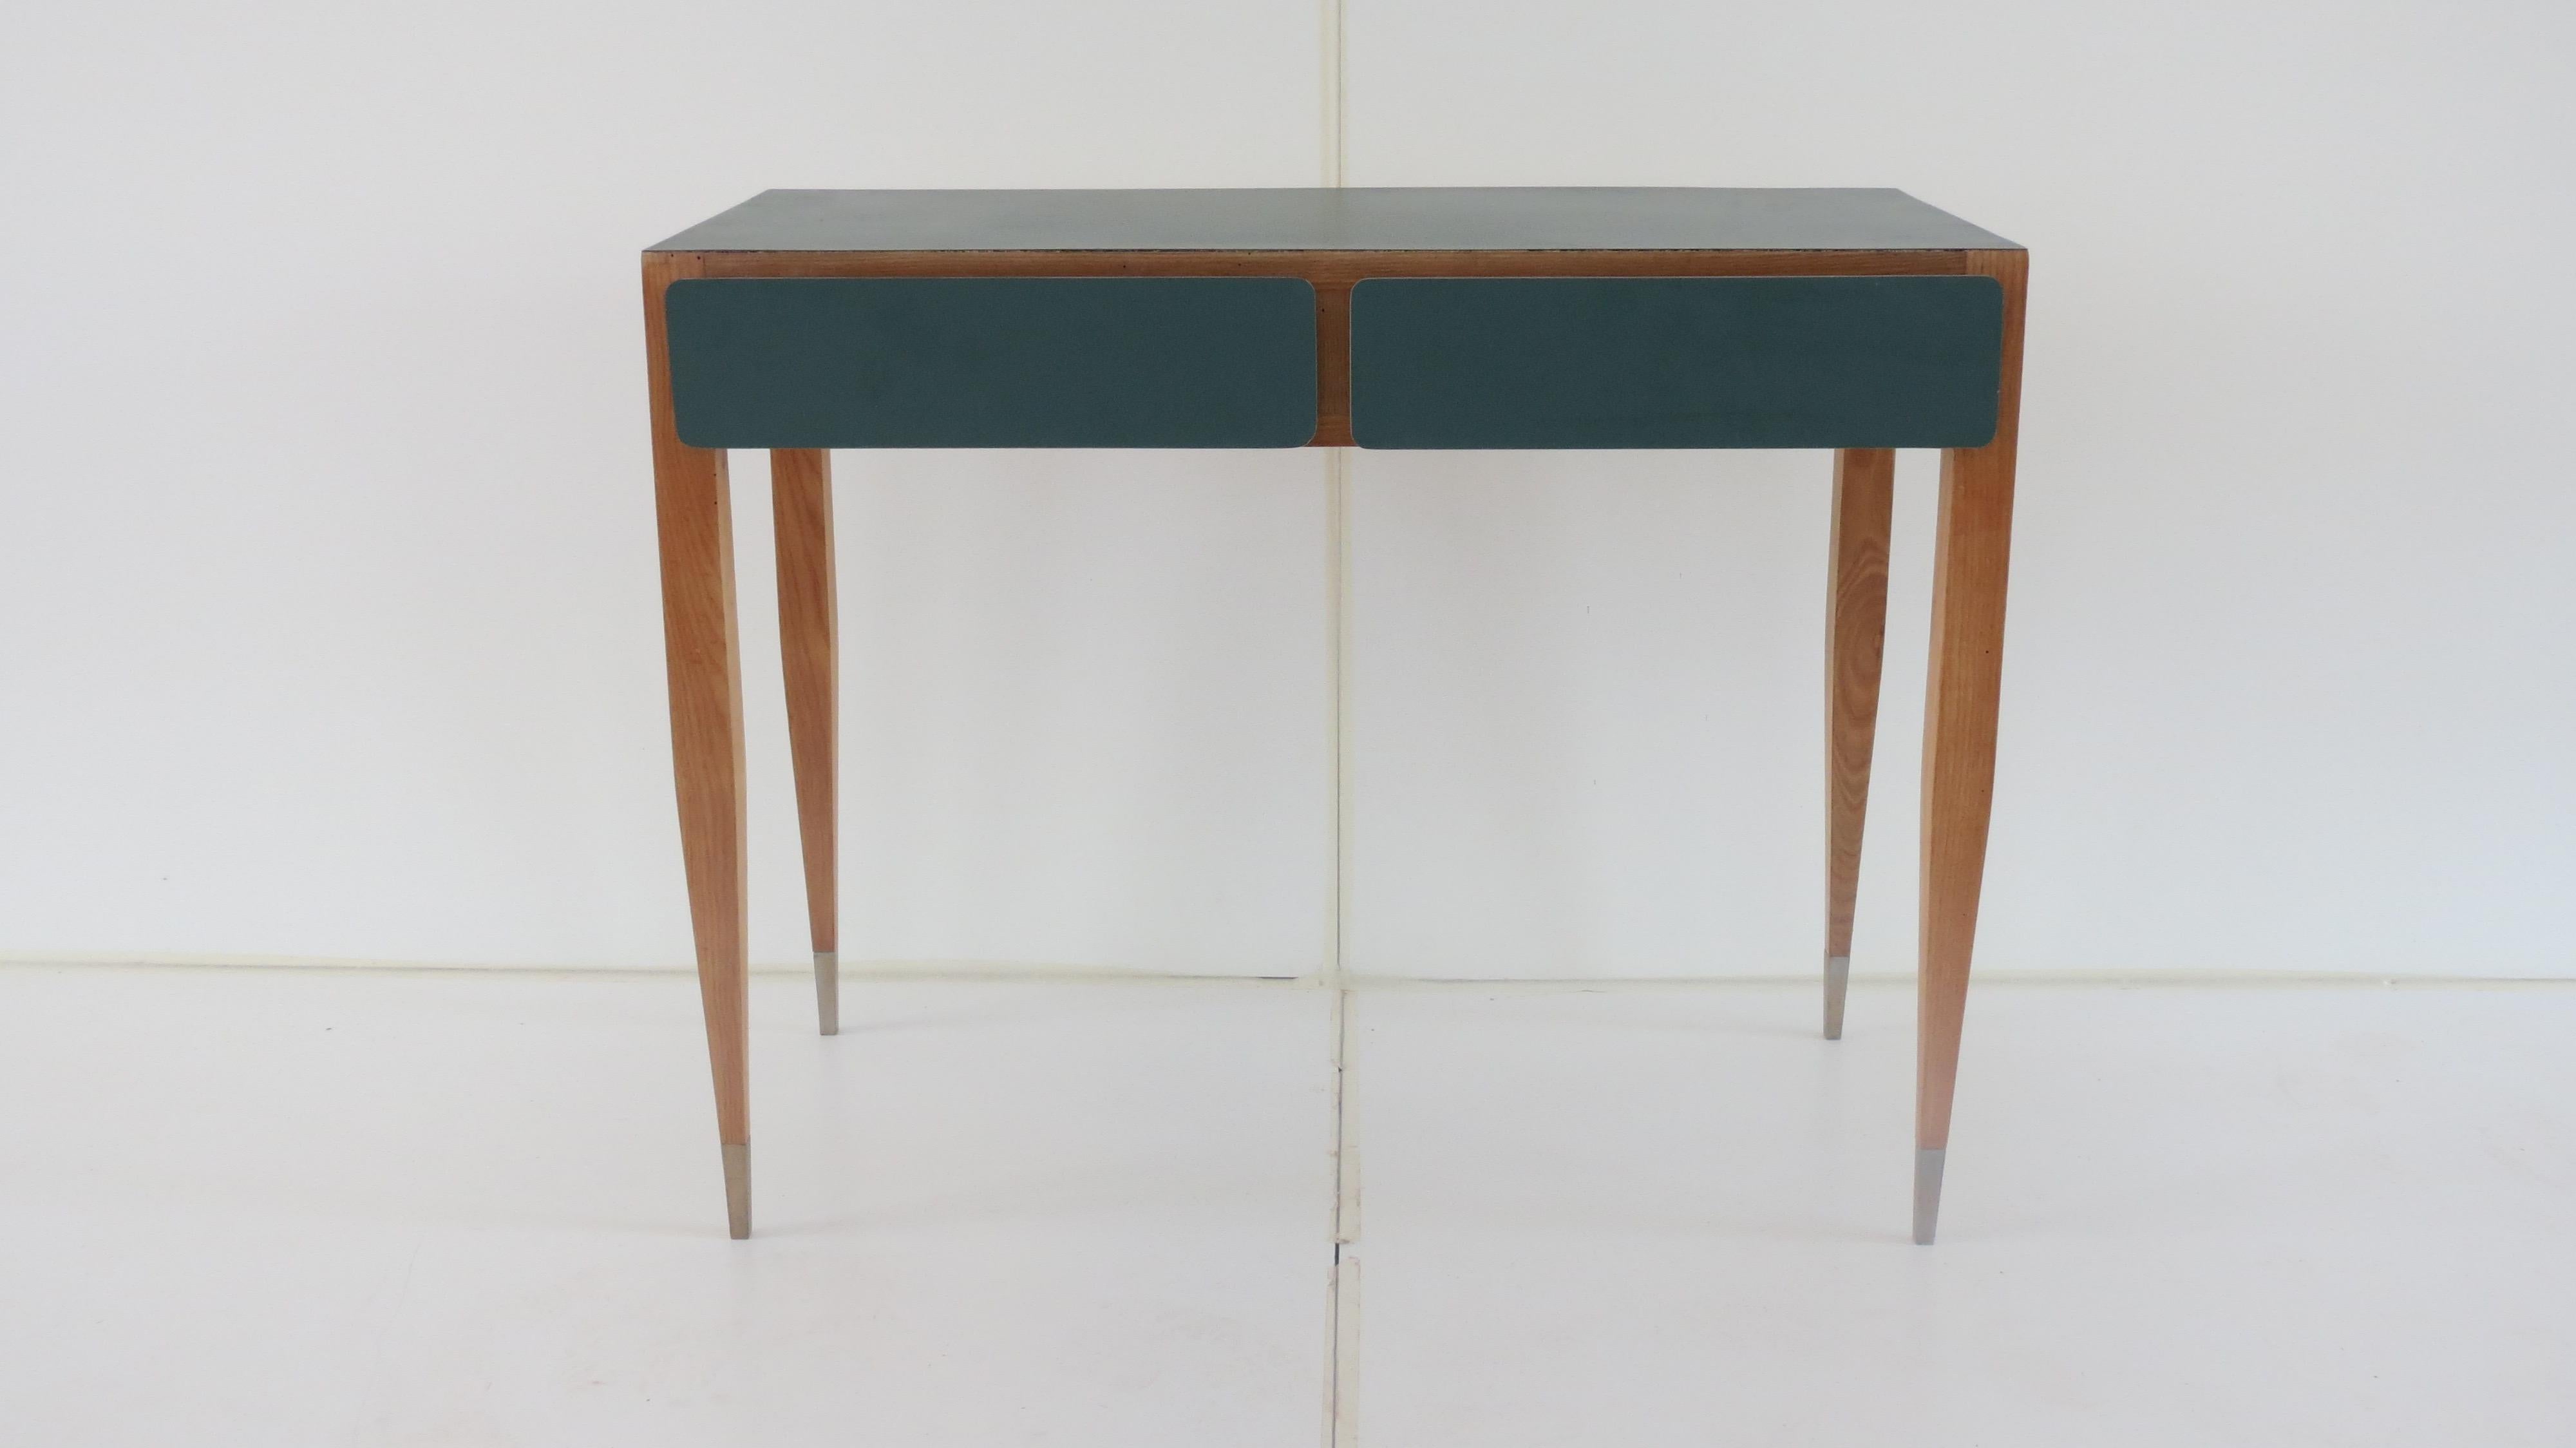 Rare vanity dressing table designed by Gio Ponti for the rooms of the Hotel Parco dei Principi in Roma
manufactured by Giordano Chiesa, 1964.
Two drawers.
Aash, laminate, nickel-plated brass- sold without the table mirror on top